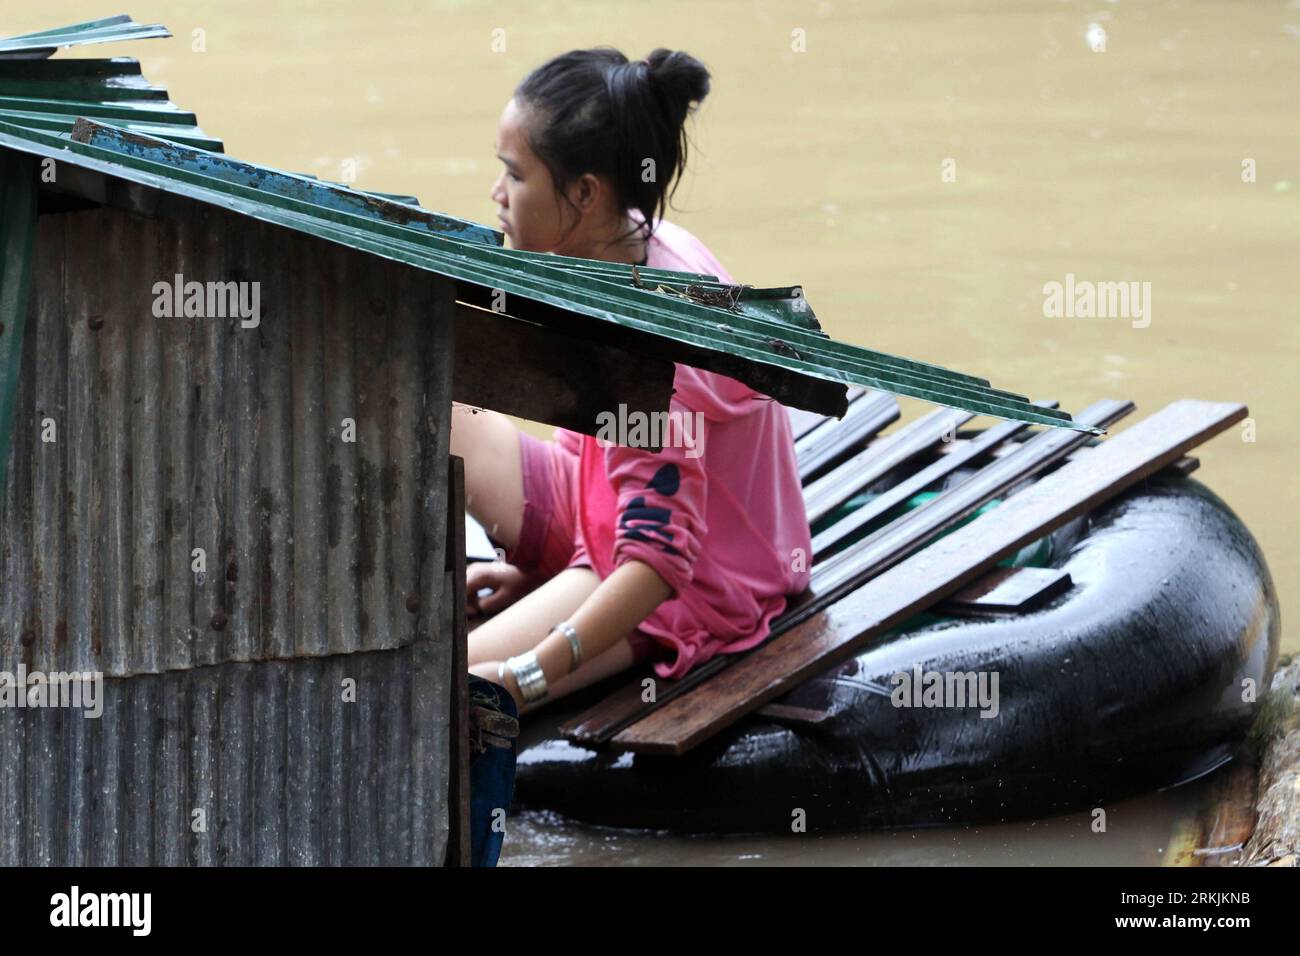 Bildnummer: 56142835  Datum: 03.10.2011  Copyright: imago/Xinhua (111003) -- PHNOM PENH, Oct. 3, 2011 (Xinhua) --A Cambodian girl checks the roof of her house, which is almost inundated by the floodwater along the Mekong River in Phnom Penh s Meanchey district, on Oct. 3, 2011. Cambodia s Deputy Prime Minister said Monday the country has been suffering more serious from global climate change in recent years, referring to the floods that has hit the country since August and killed at least 150 so far. (Xinhua/Philong Sovan) (srb) CAMBODIA-PHNOM PENH-FLOOD PUBLICATIONxNOTxINxCHN Gesellschaft Übe Stock Photo